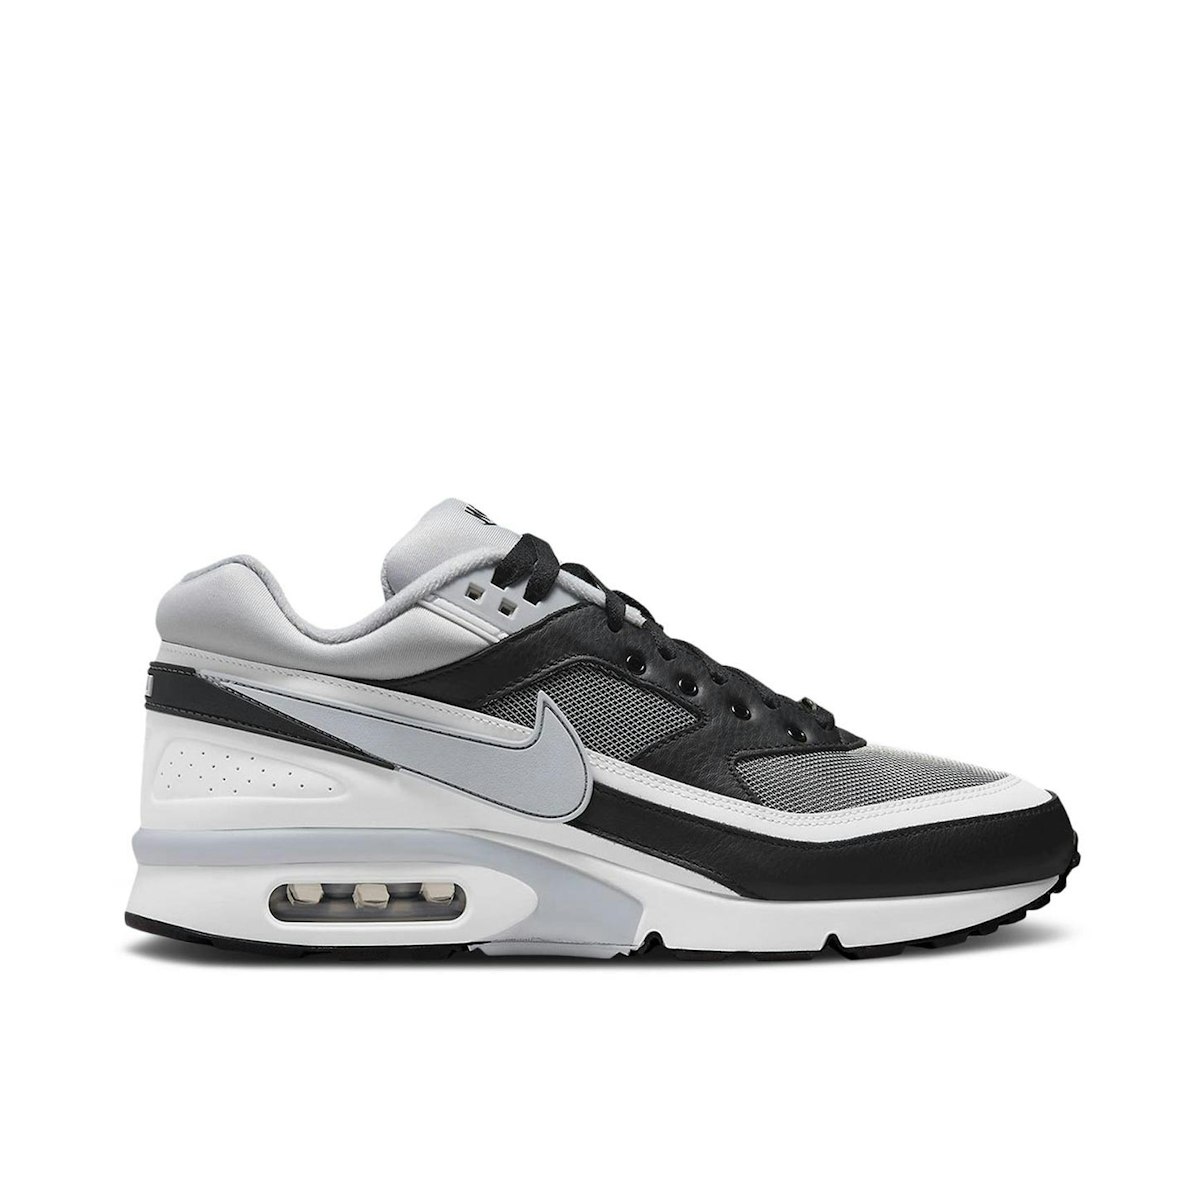 Email Implementar Contando insectos Nike Air Max BW Lyon | DM6445-001 | Laced